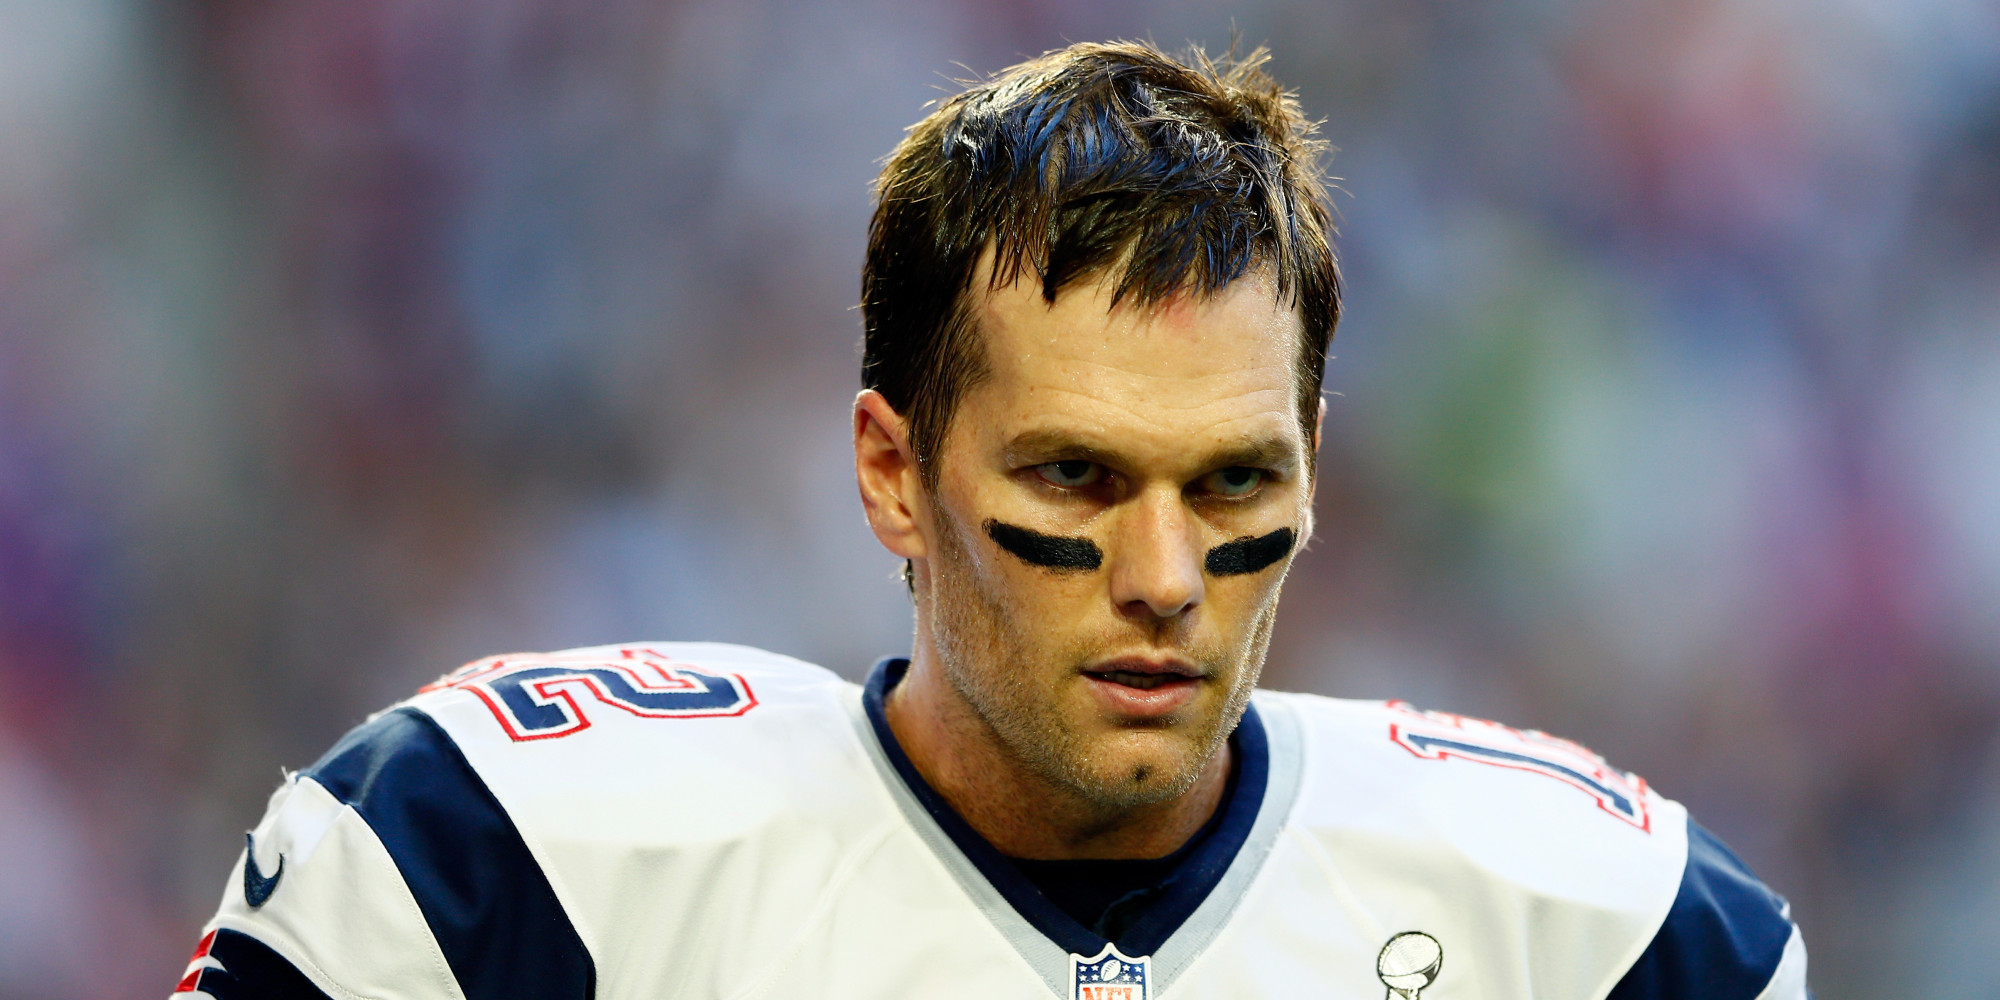 Tom Brady's Agent Rips 'Deflategate' Report And Its ‘So-Called Facts